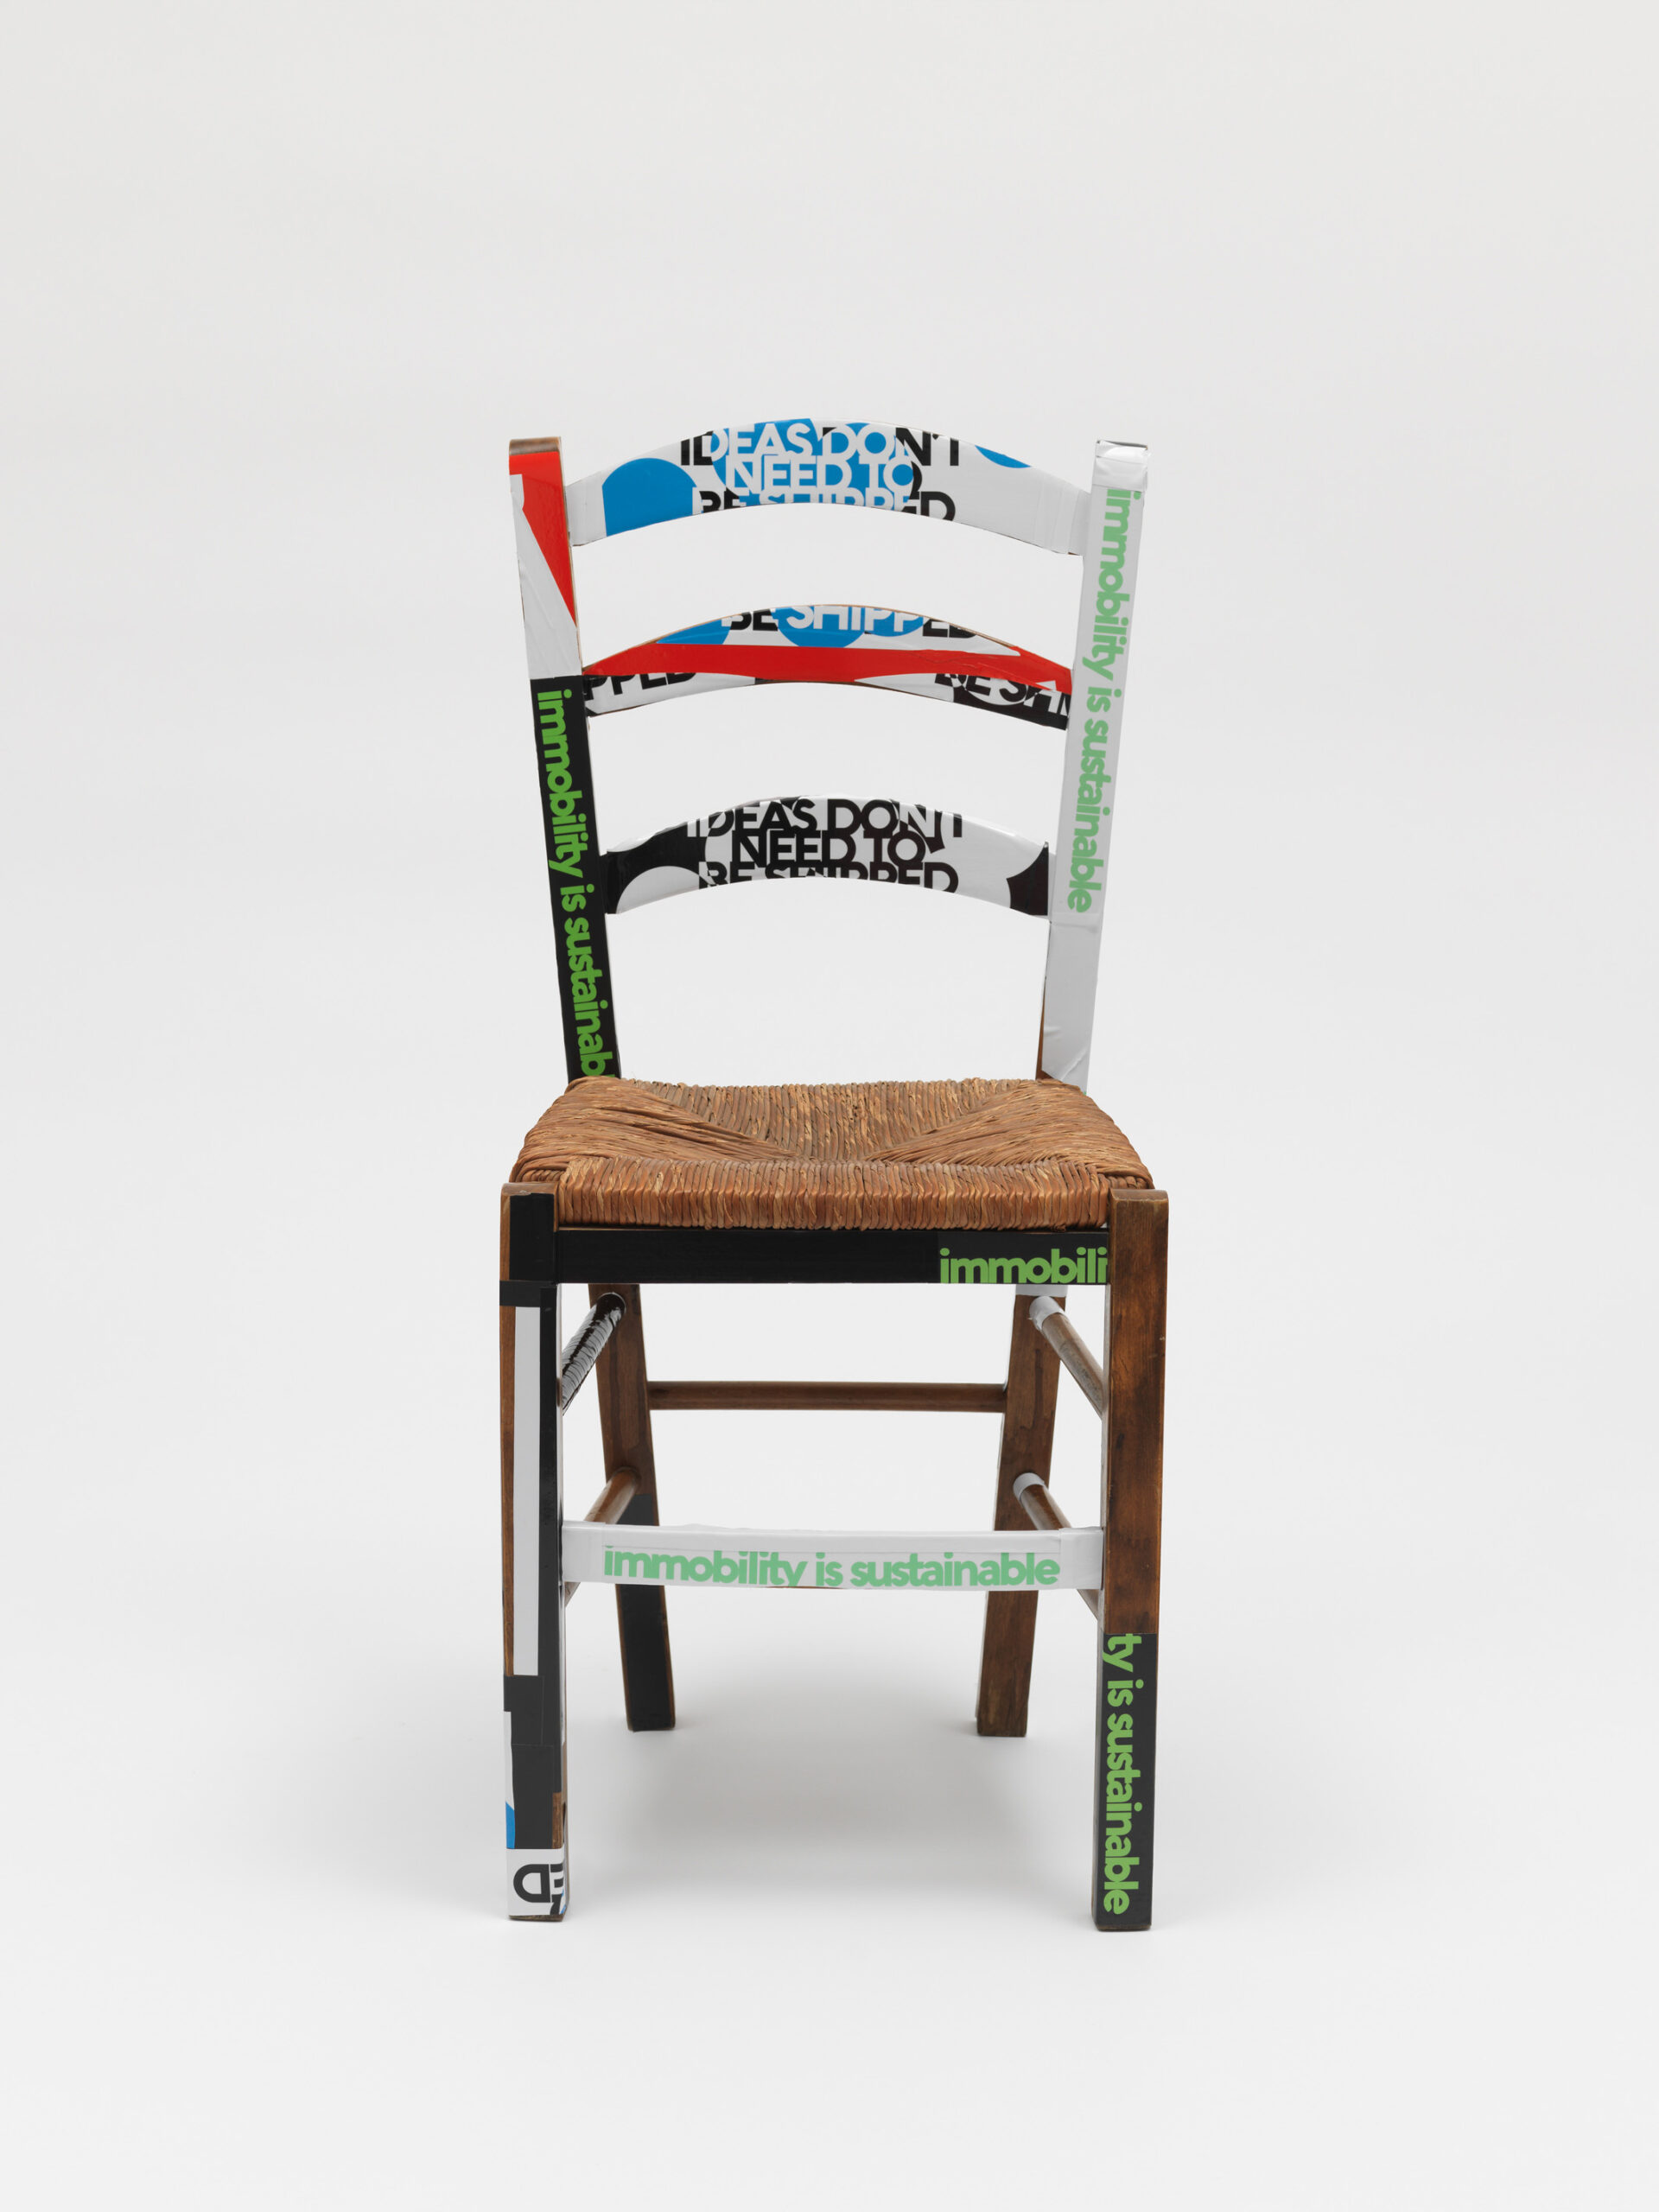 Product image: Kafeneion Chair, modified by Evi & Vasso, claim stickers, 2022 Athens, 4.6 tons